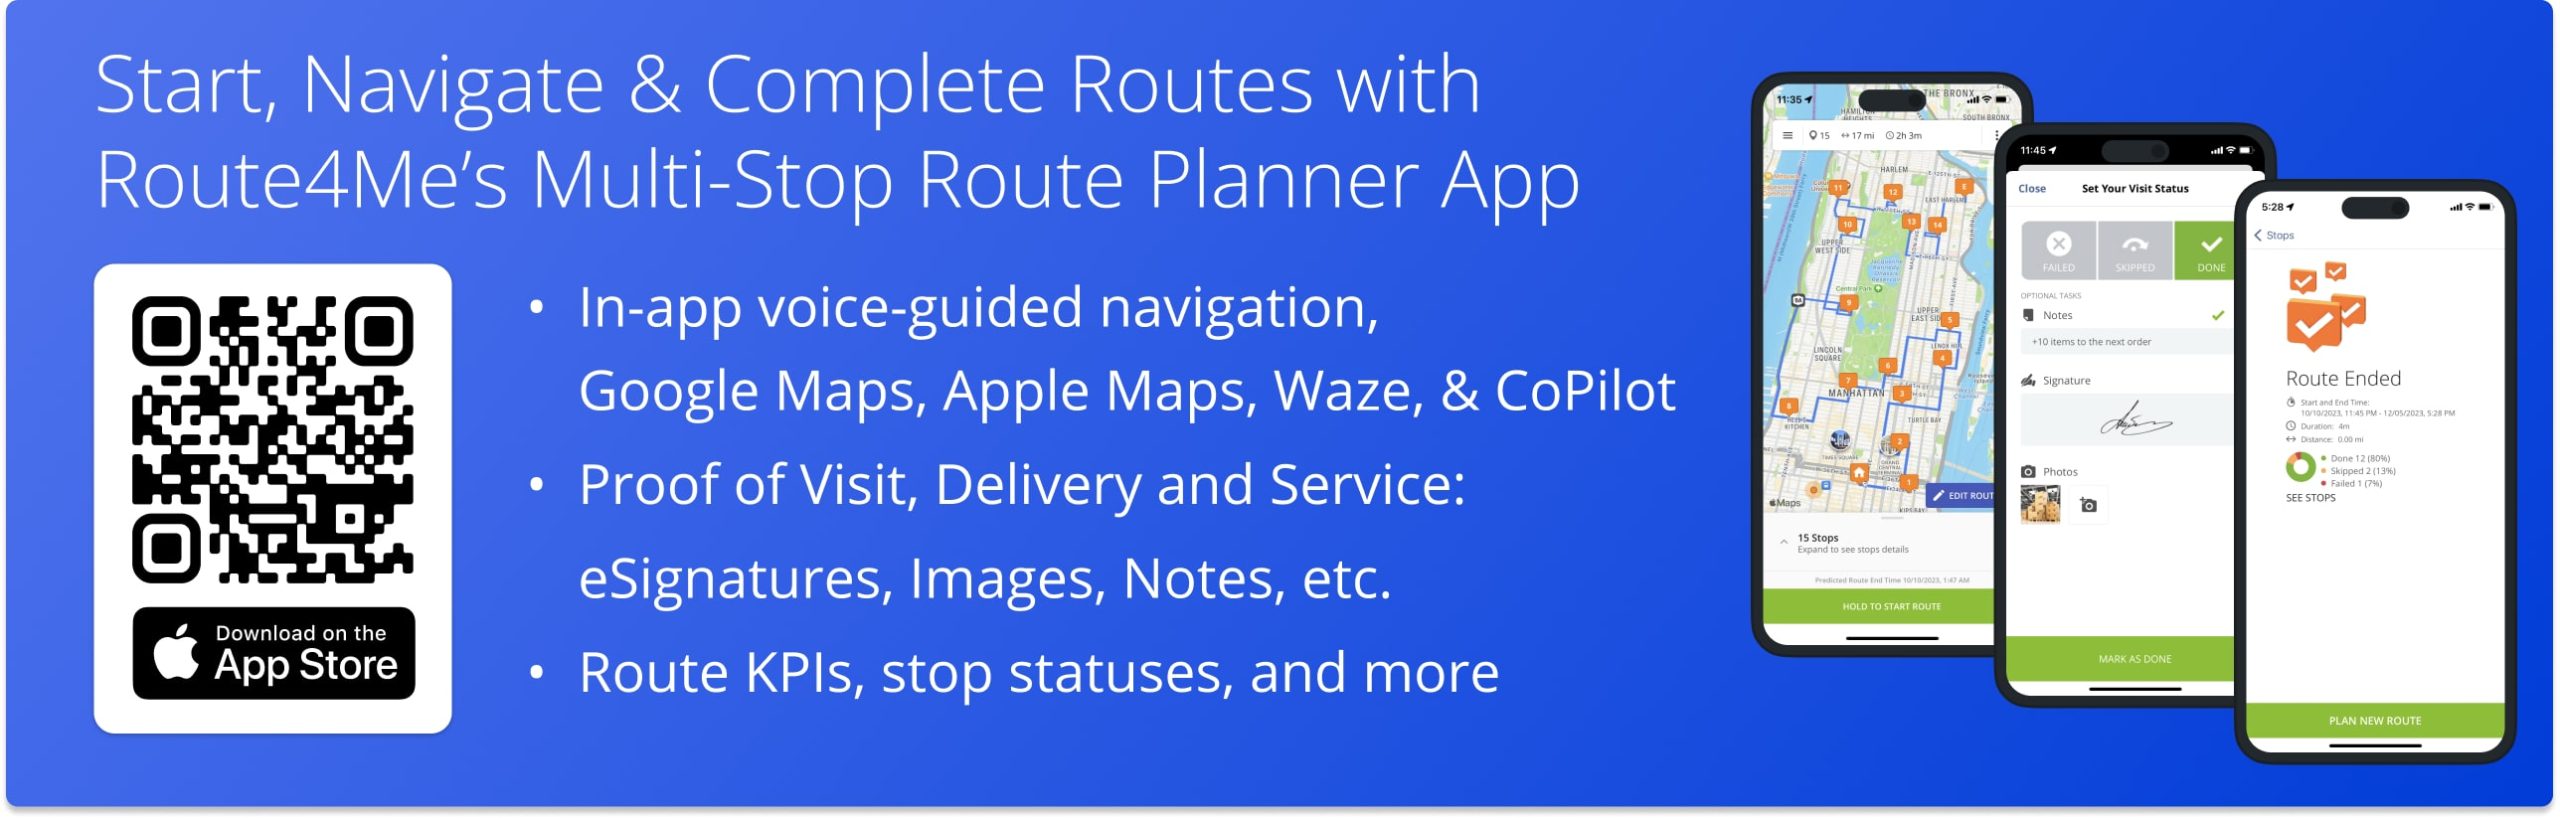 Route4Me's Multi-Stop Route Optimization app with in-app navigation, Google Maps, Apple Maps, Waze, electronic proof of visit, delivery, and service.